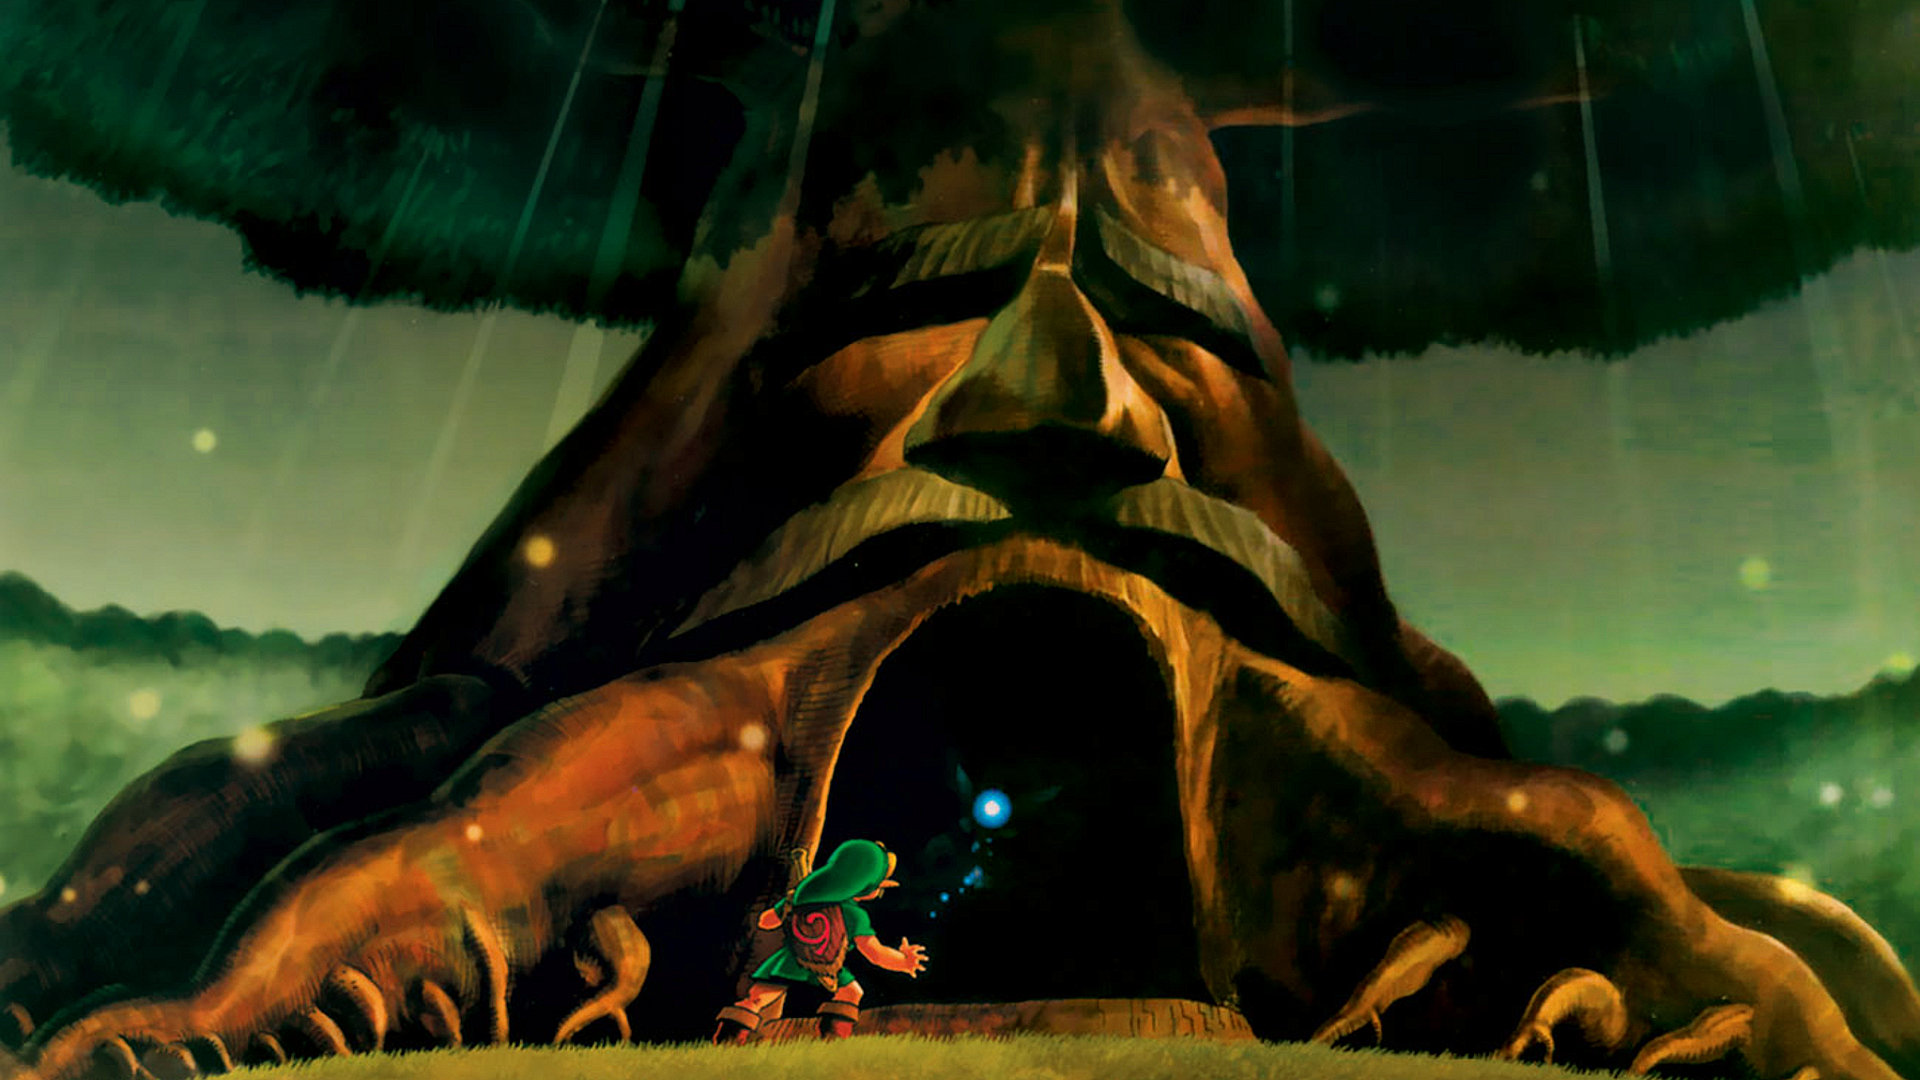 Awesome The Legend Of Zelda: Ocarina Of Time free wallpaper ID:151673 for full hd 1920x1080 desktop